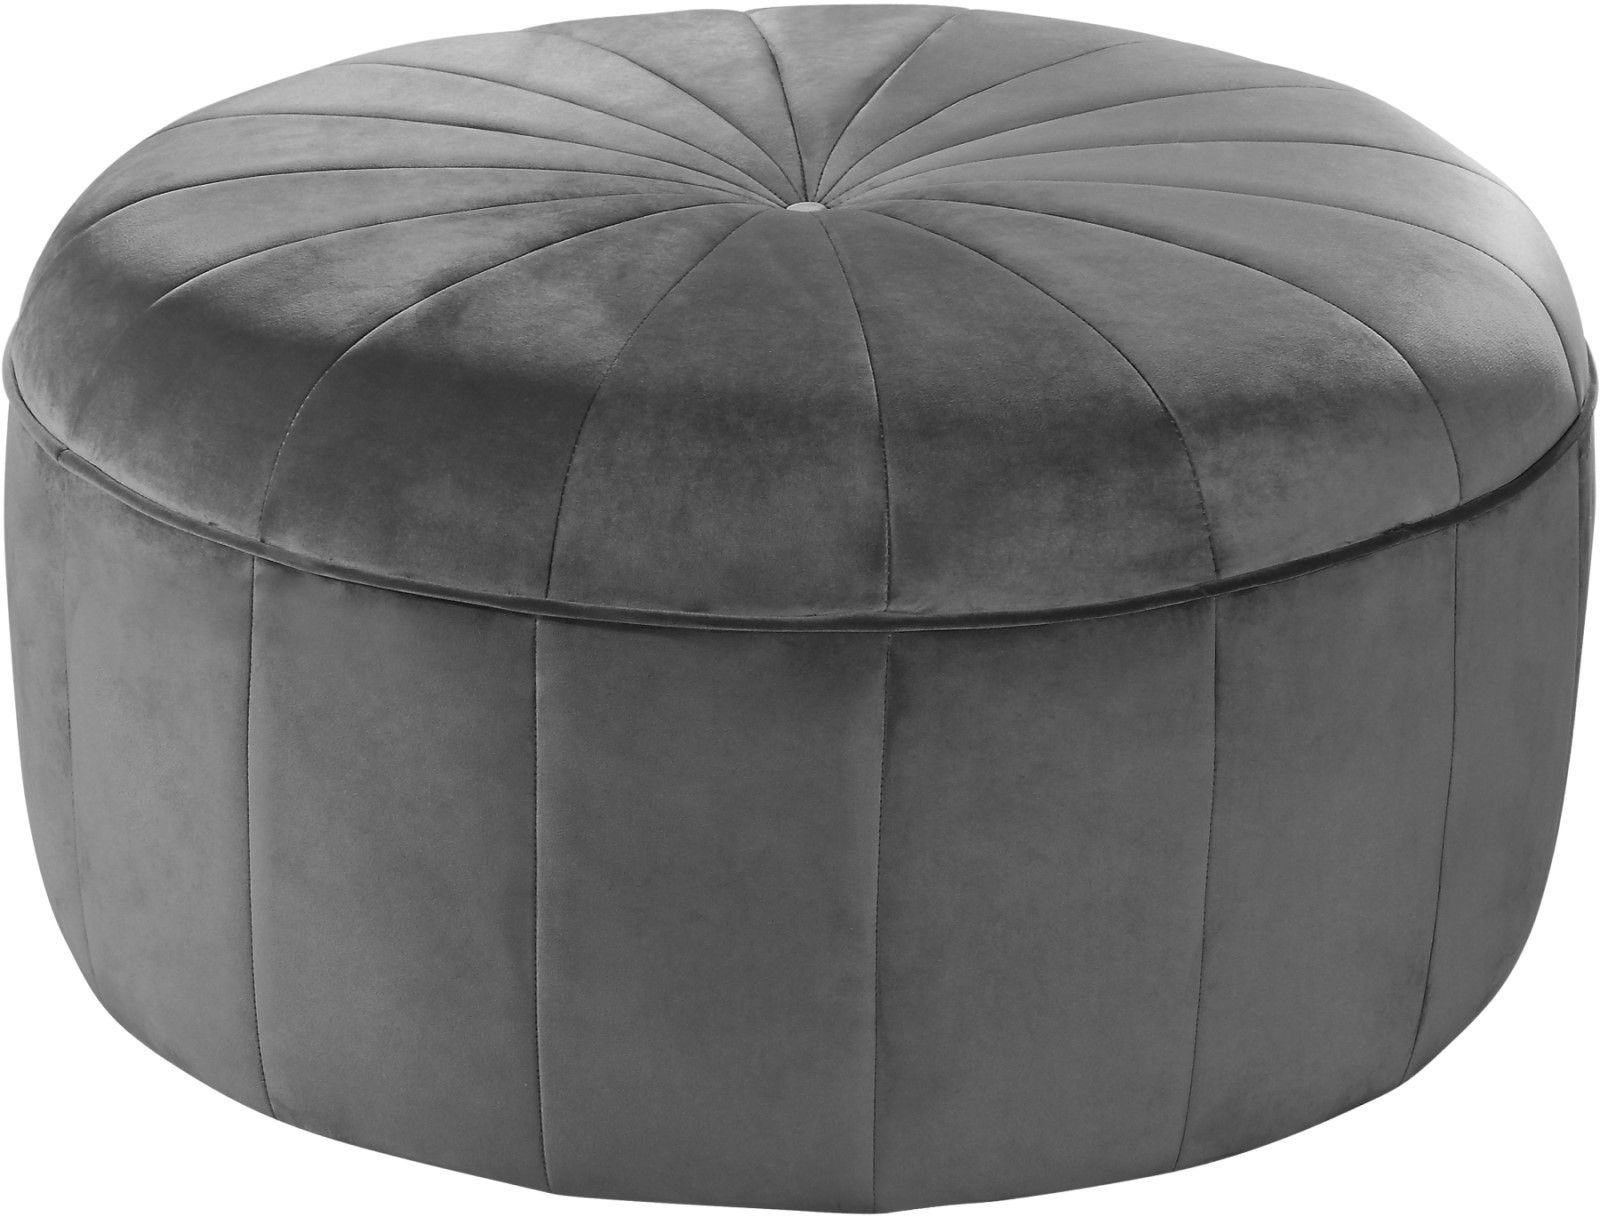 Thane Contemporary Round Ottoman Bench In Dark Grey Channel Tufted Velvet With Charcoal And Light Gray Cotton Pouf Ottomans (View 16 of 20)